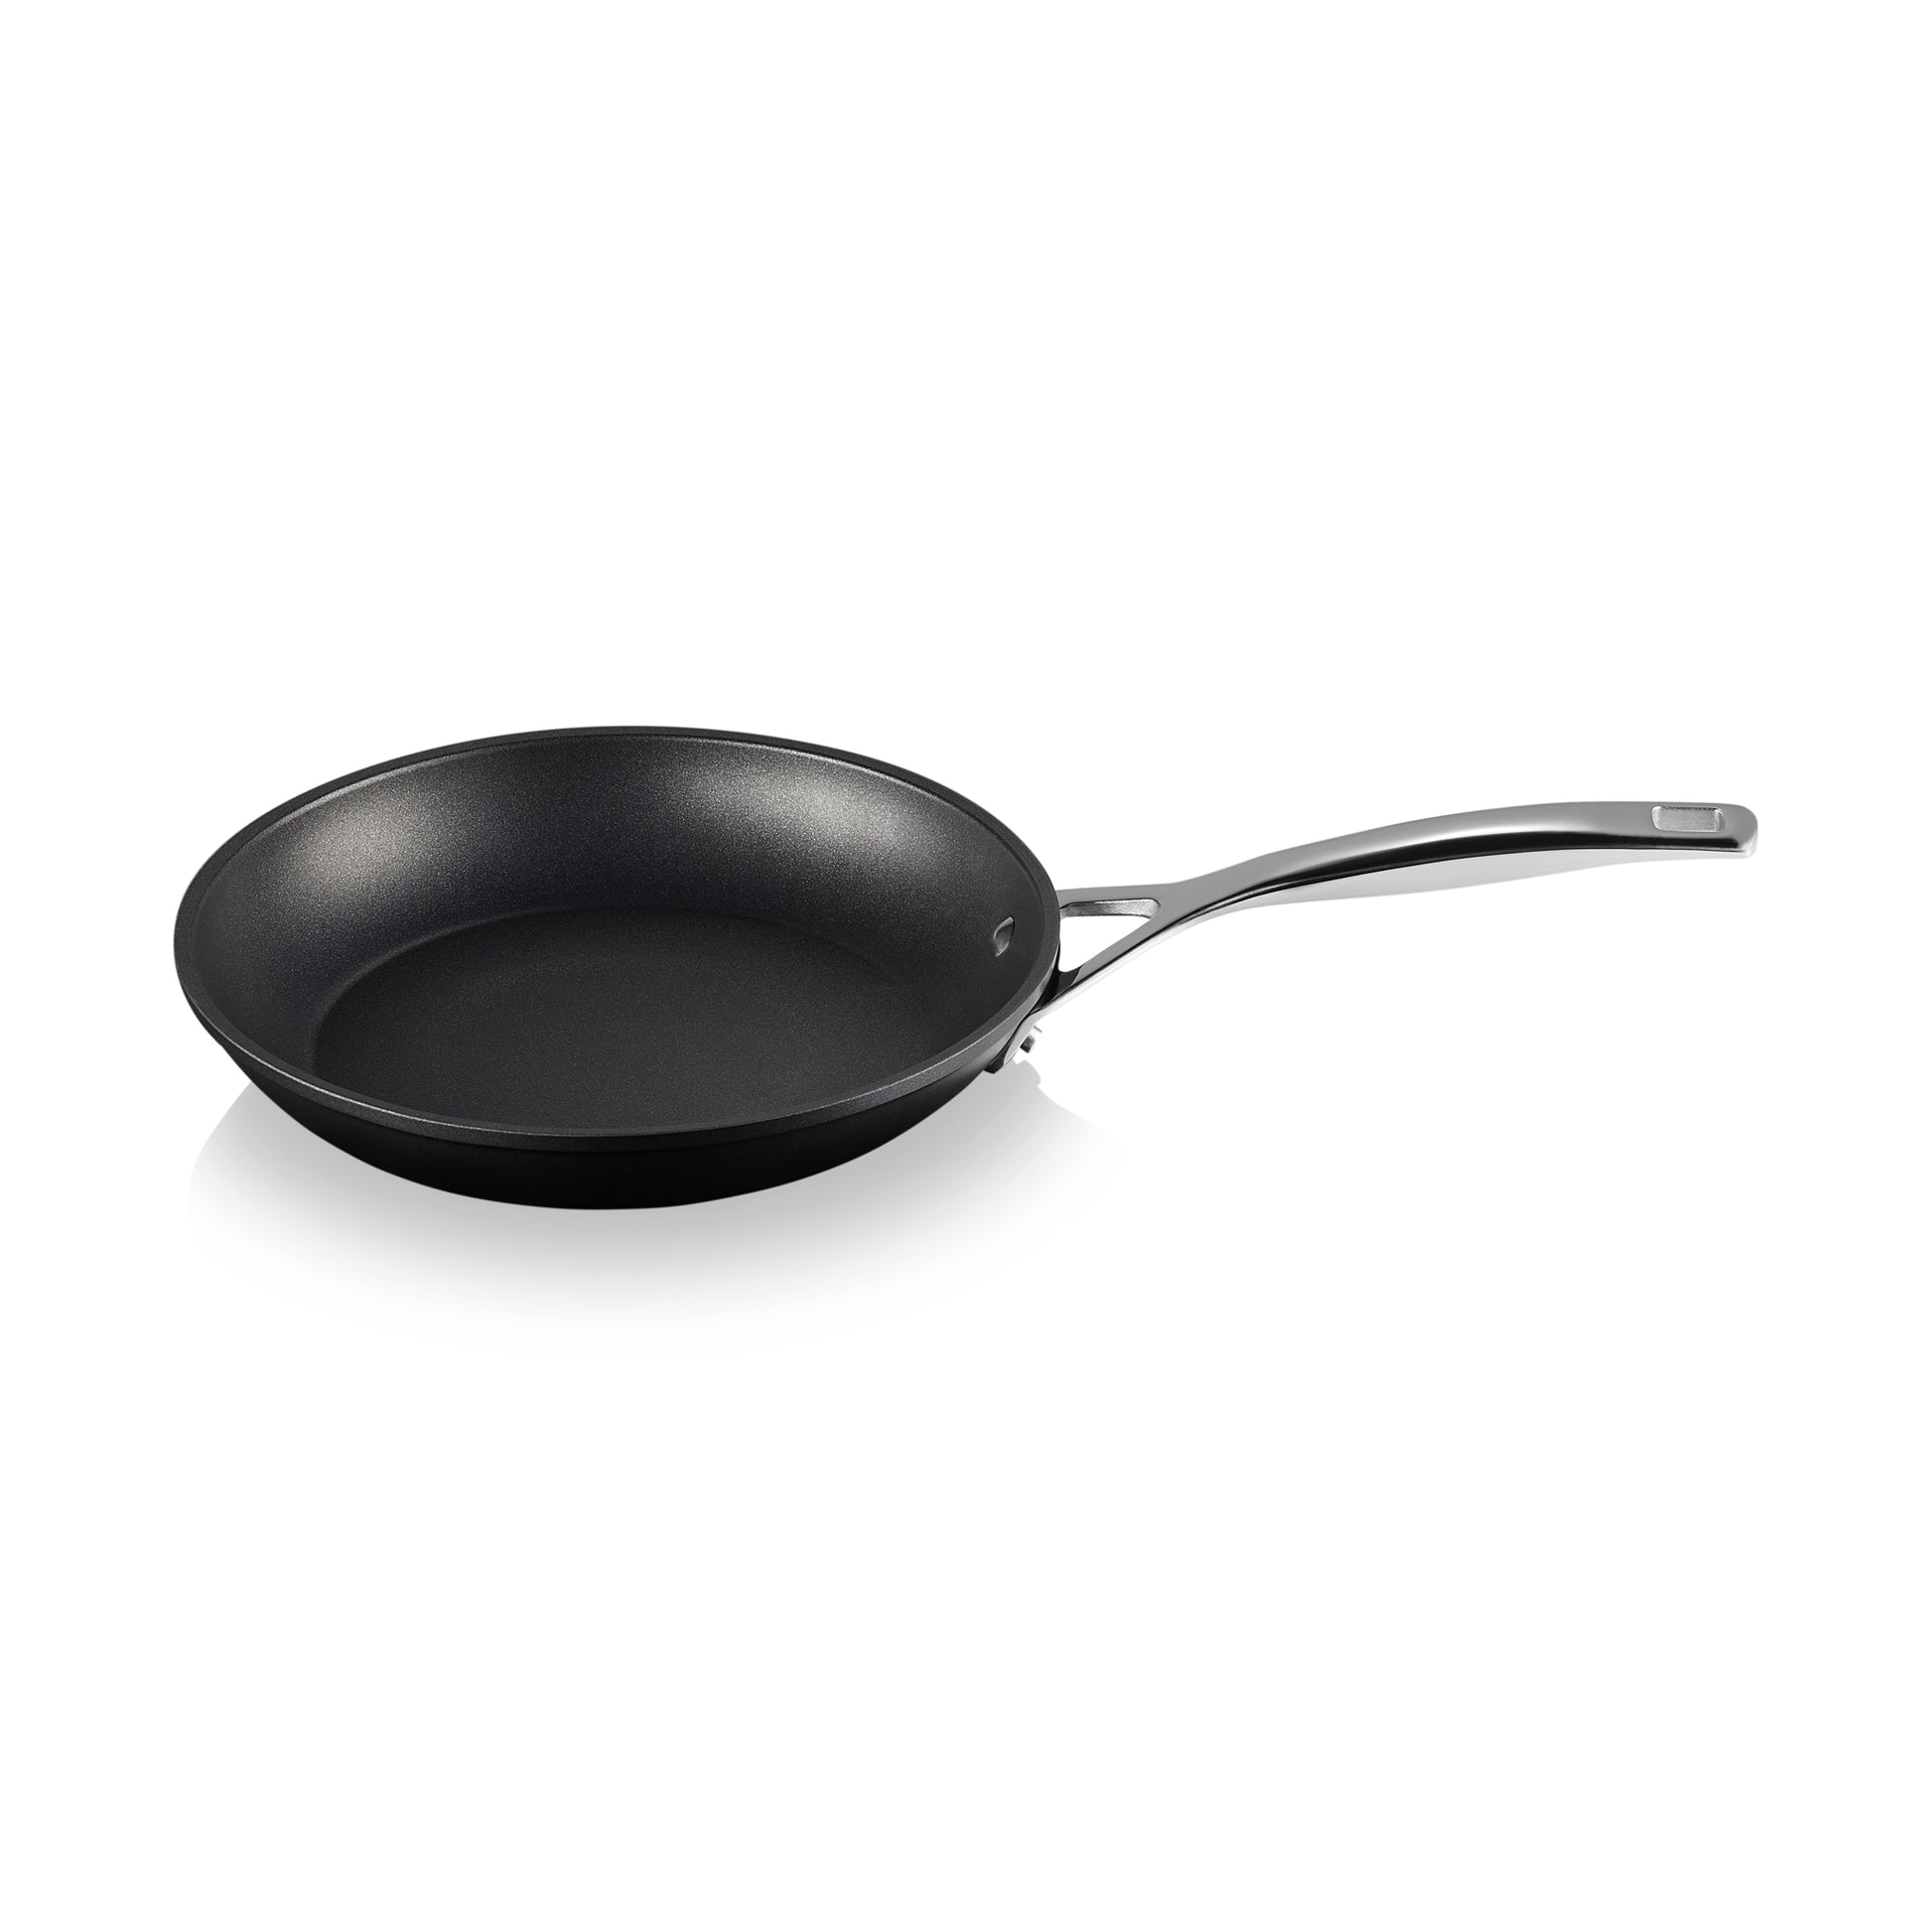 A black frying pan with a stainless steel handle